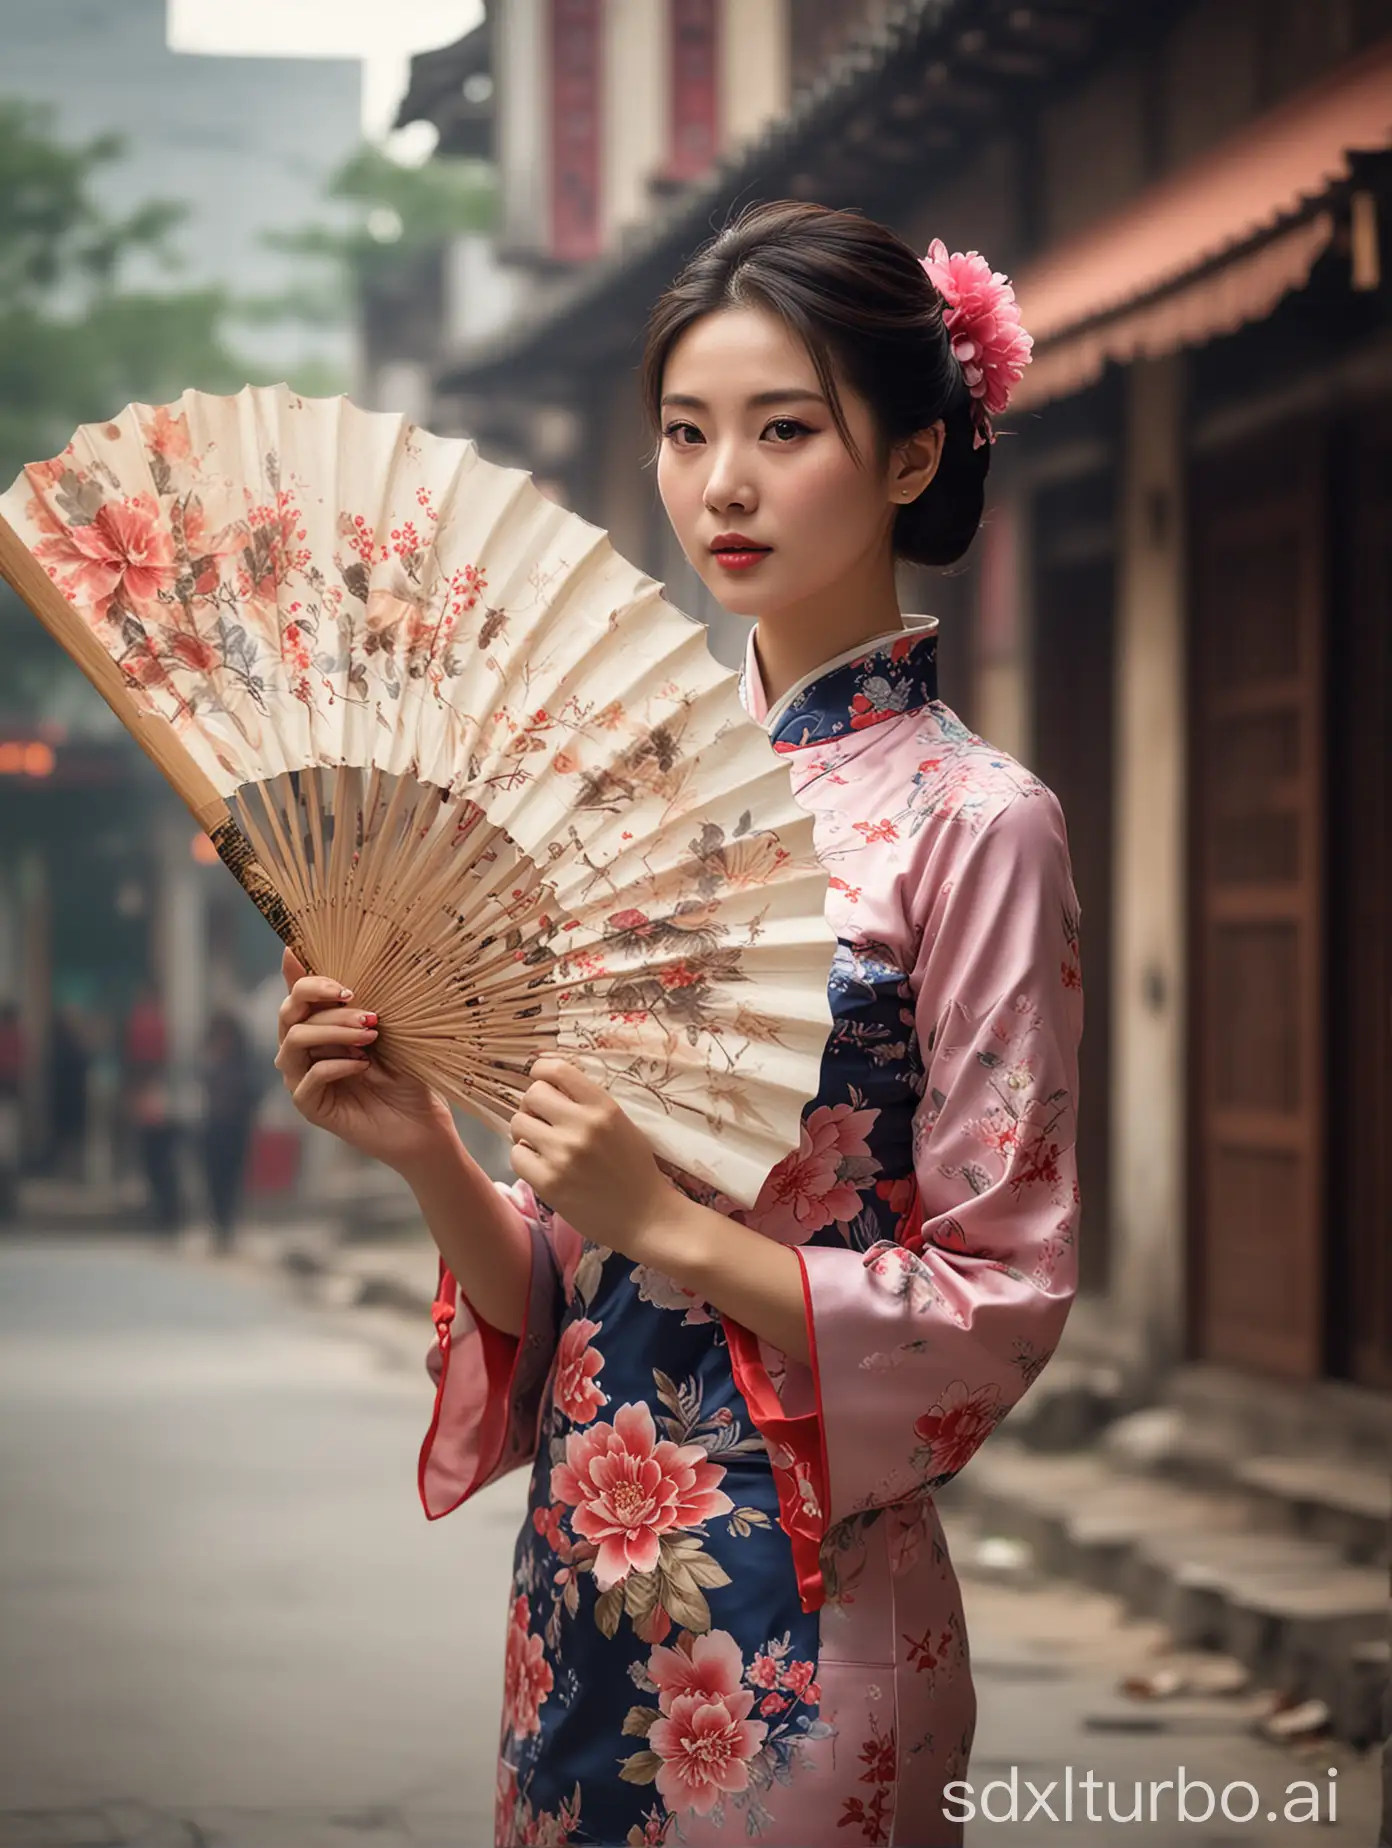 Qipao woman, holding a fan, Republican style street background, light breeze sweeps, her eyes reflect a hint of anticipation.